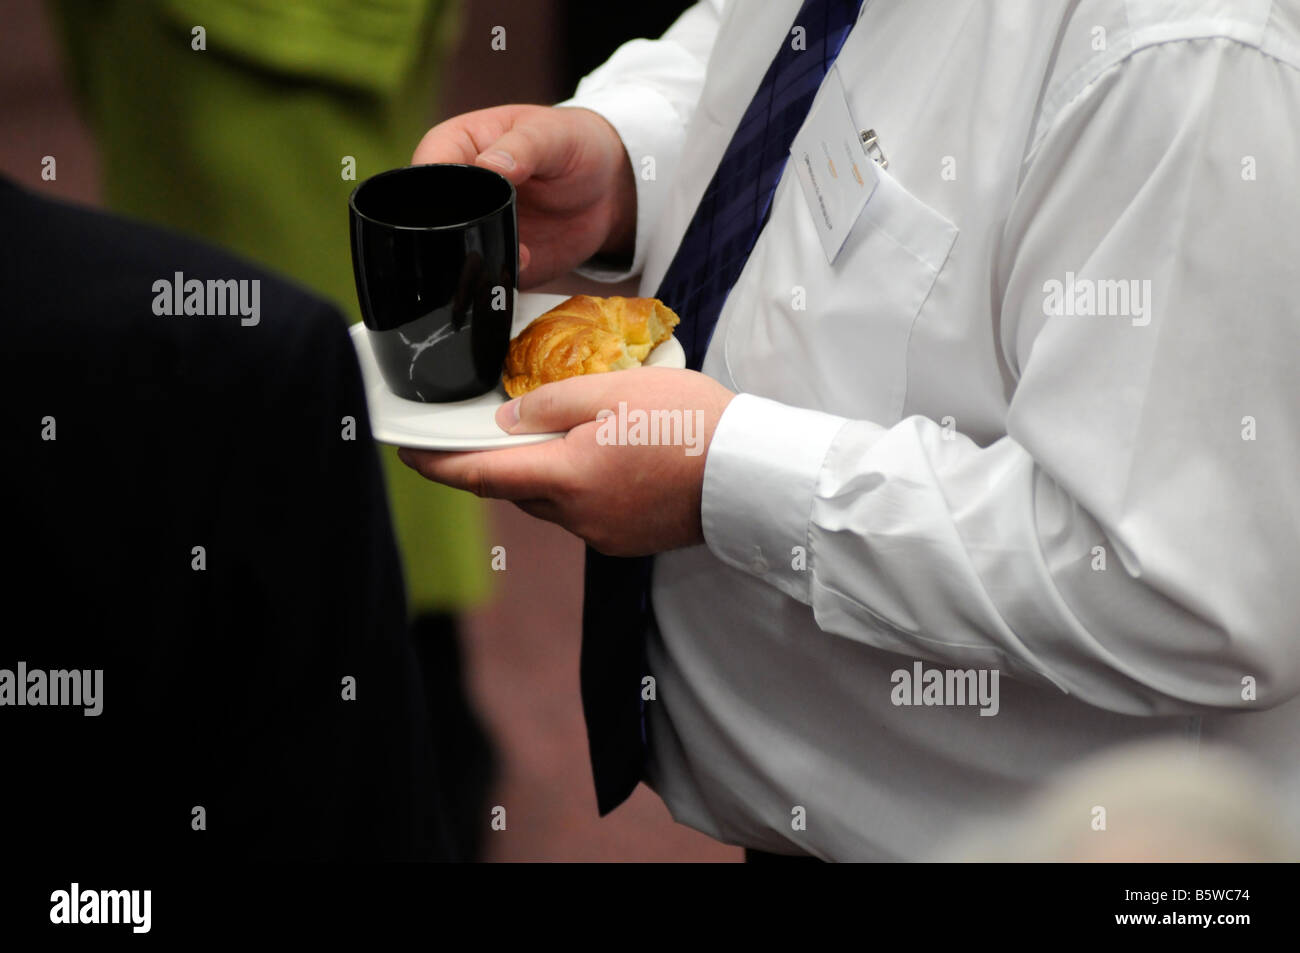 Royalty free photograph of overweight business man eating an unhealthy meal at a meeting in a hotel in London UK Stock Photo